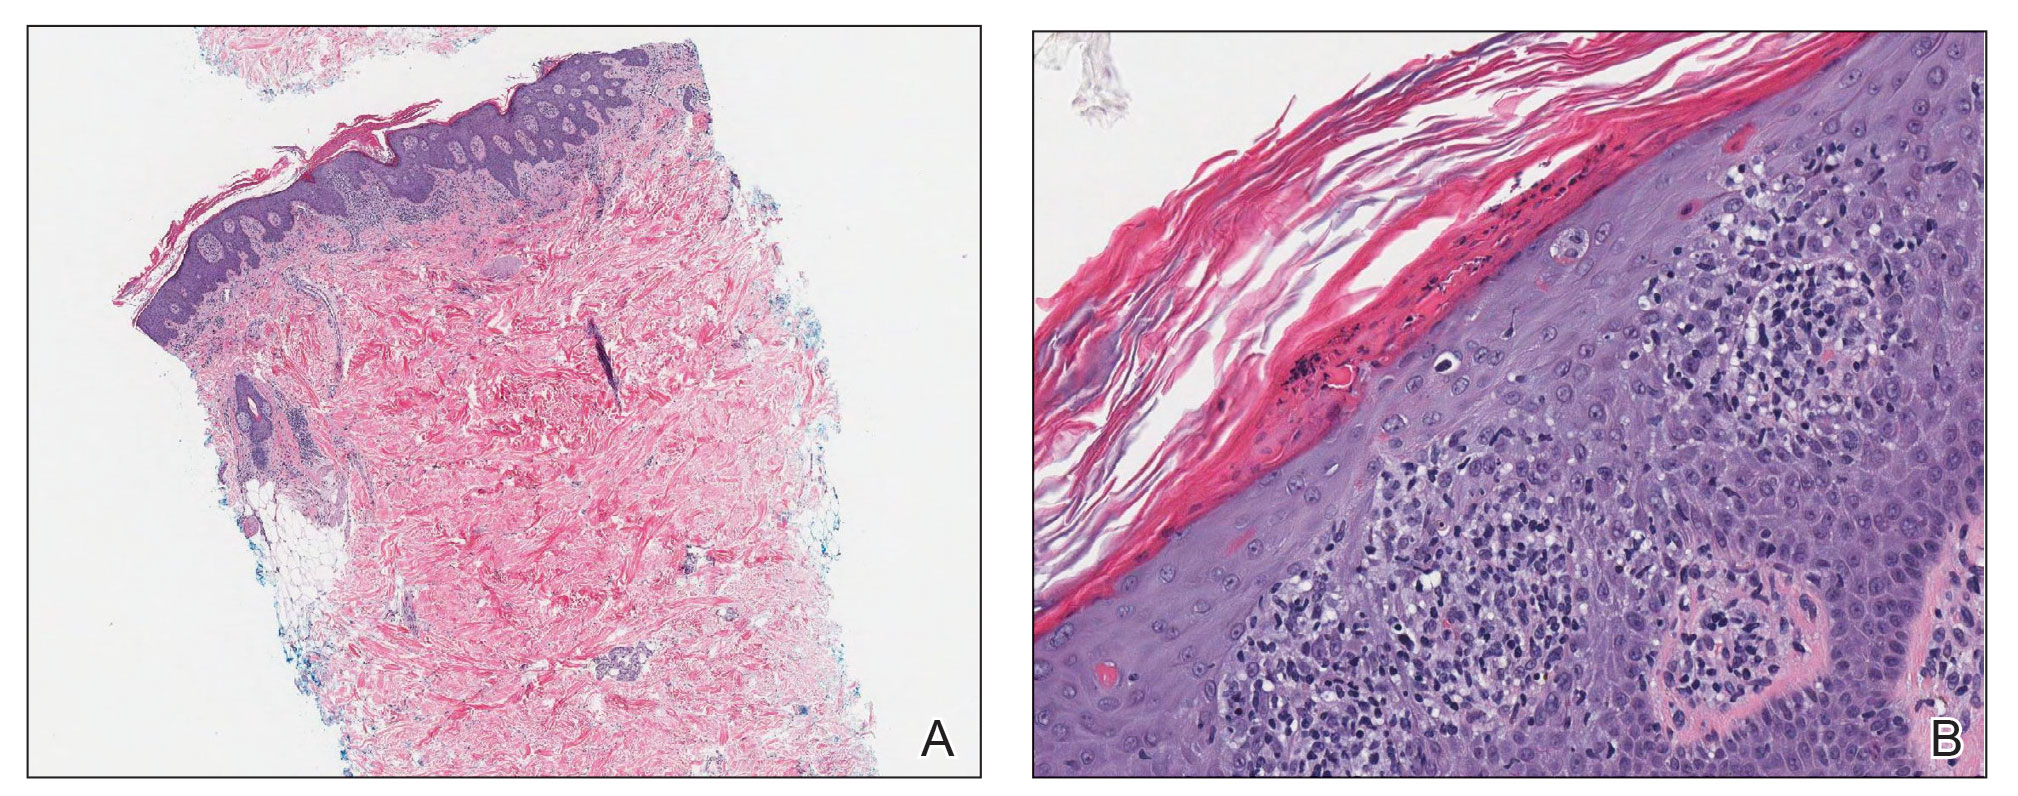 A, Histopathology of one of the lesions on the back showed mainly epidermal and superficial dermal involvement (H&E, original magnification ×40). B, Psoriasiform dermatitis with confluent parakeratosis and scattered necrotic keratinocytes also were noted 